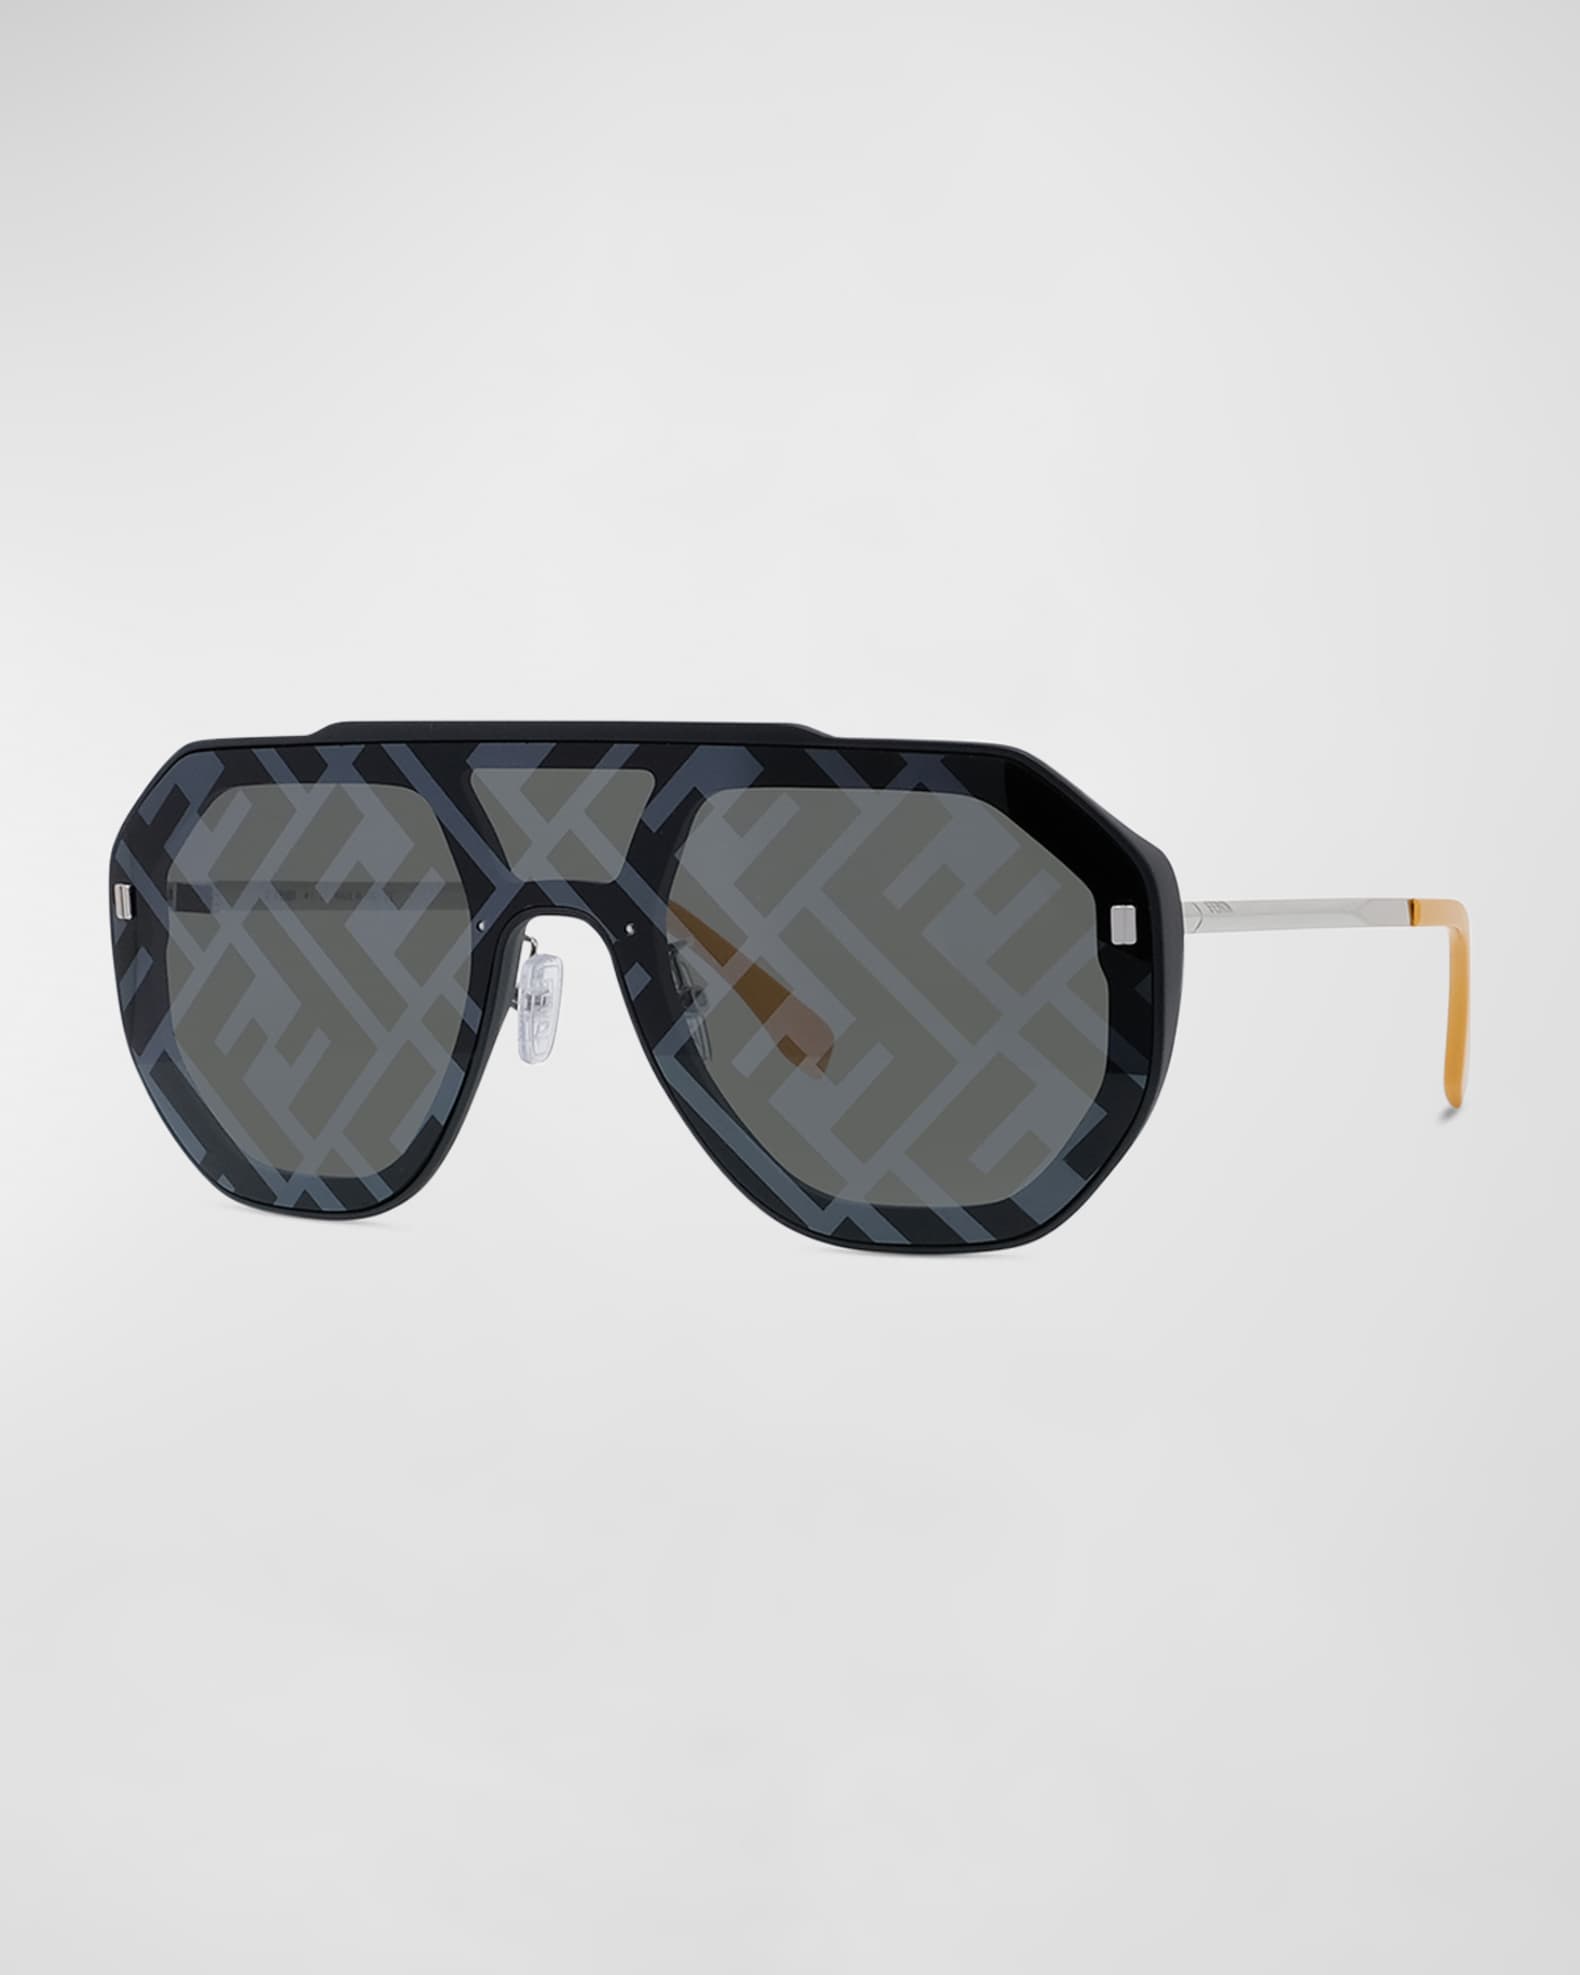 Chanel Black Wrap Sunglasses with Silver Monogram Detail